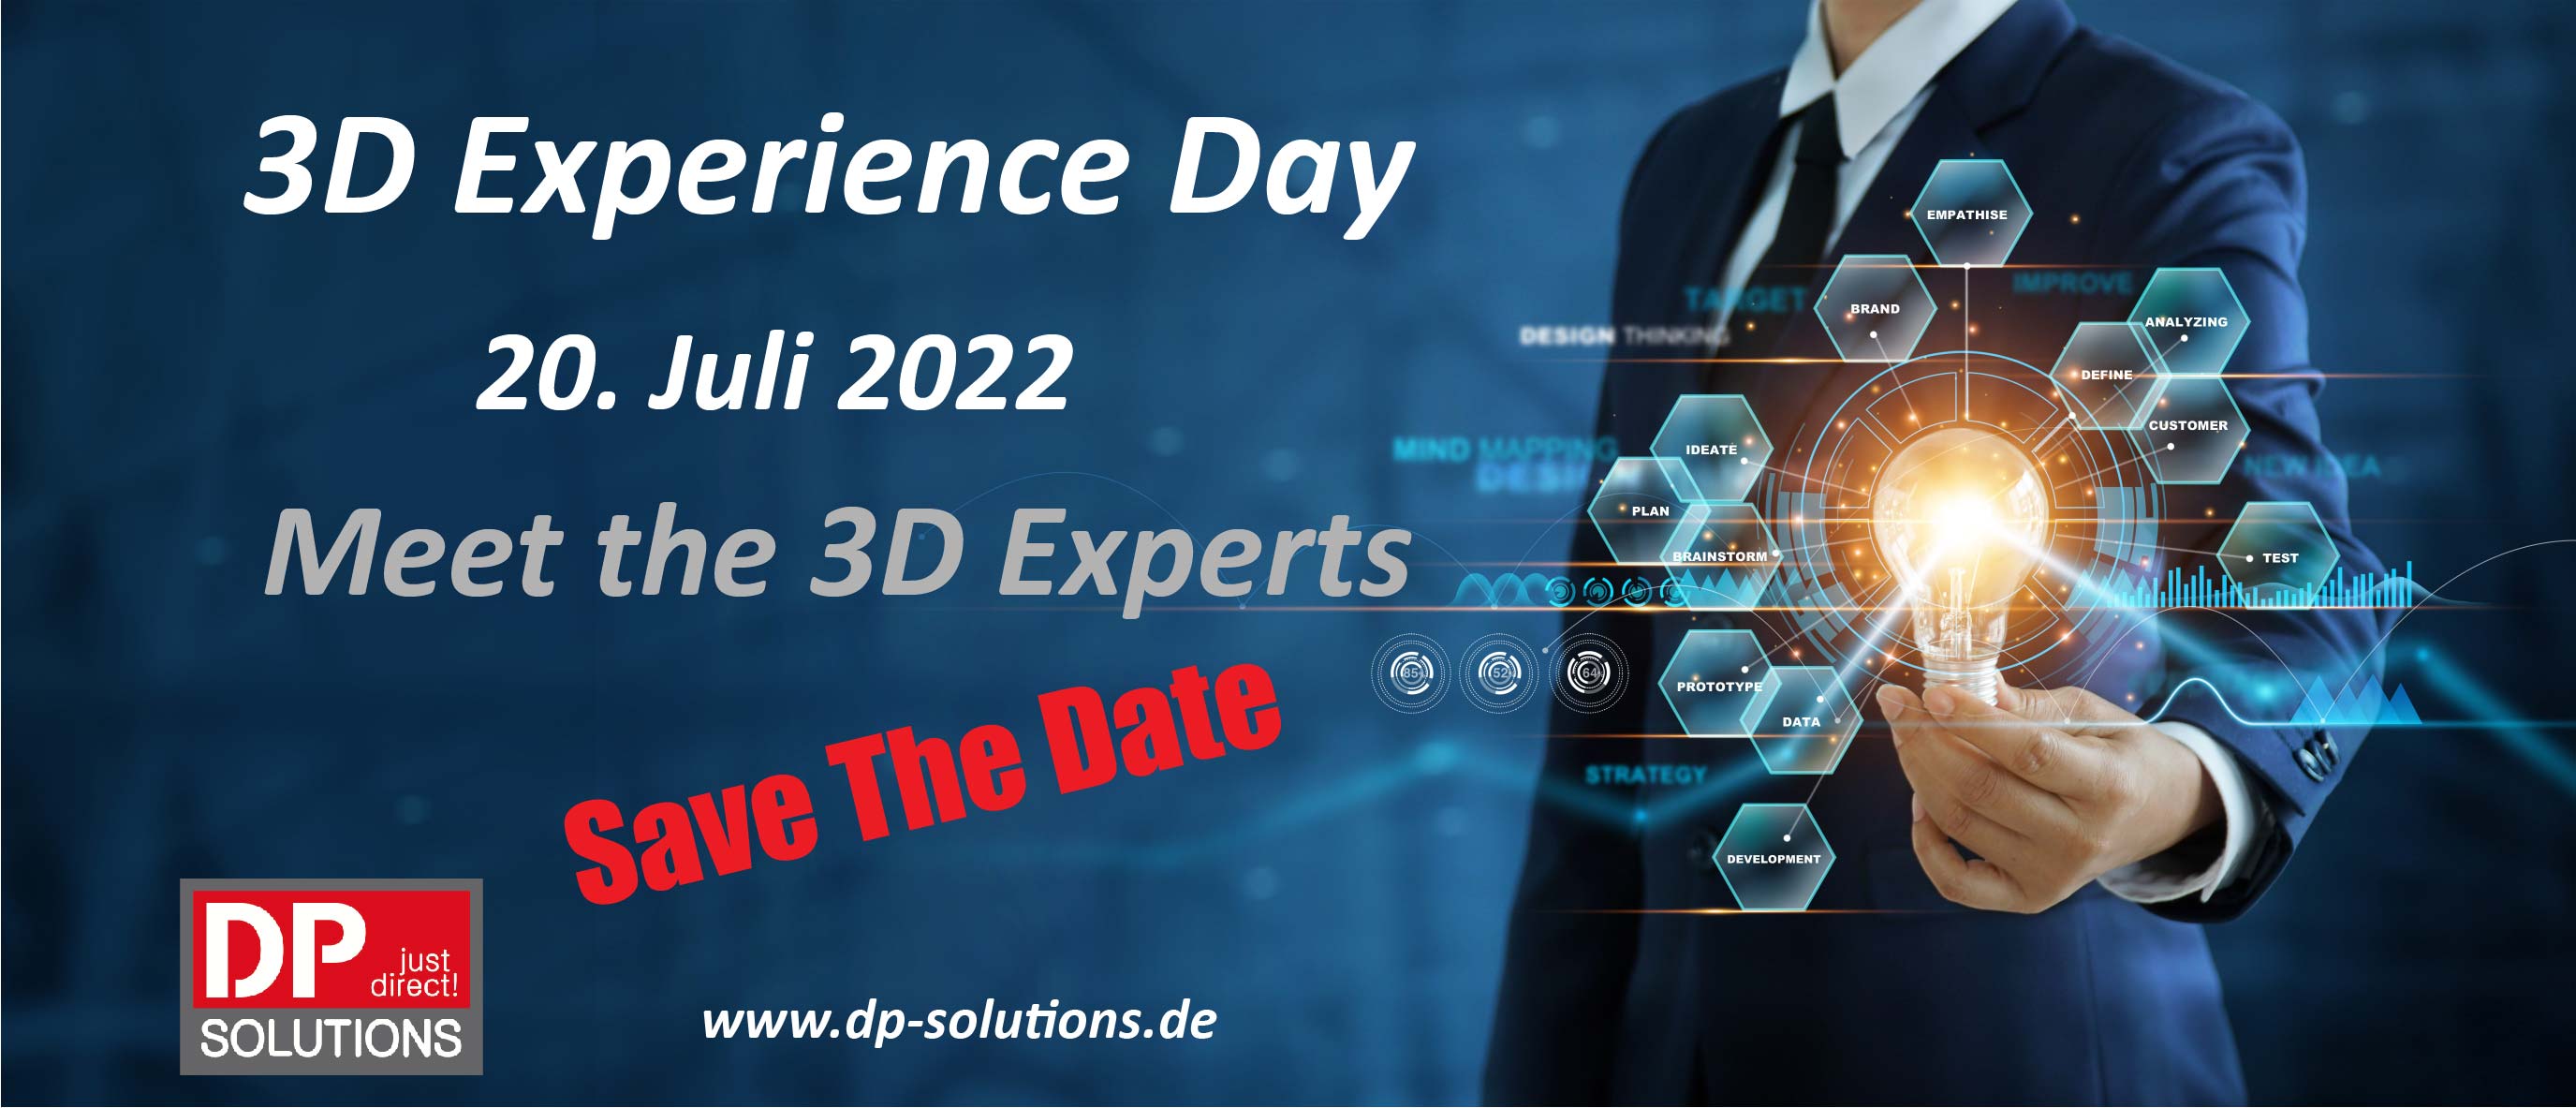 3D-Experience-DayCNr3wH9h2Sdwq